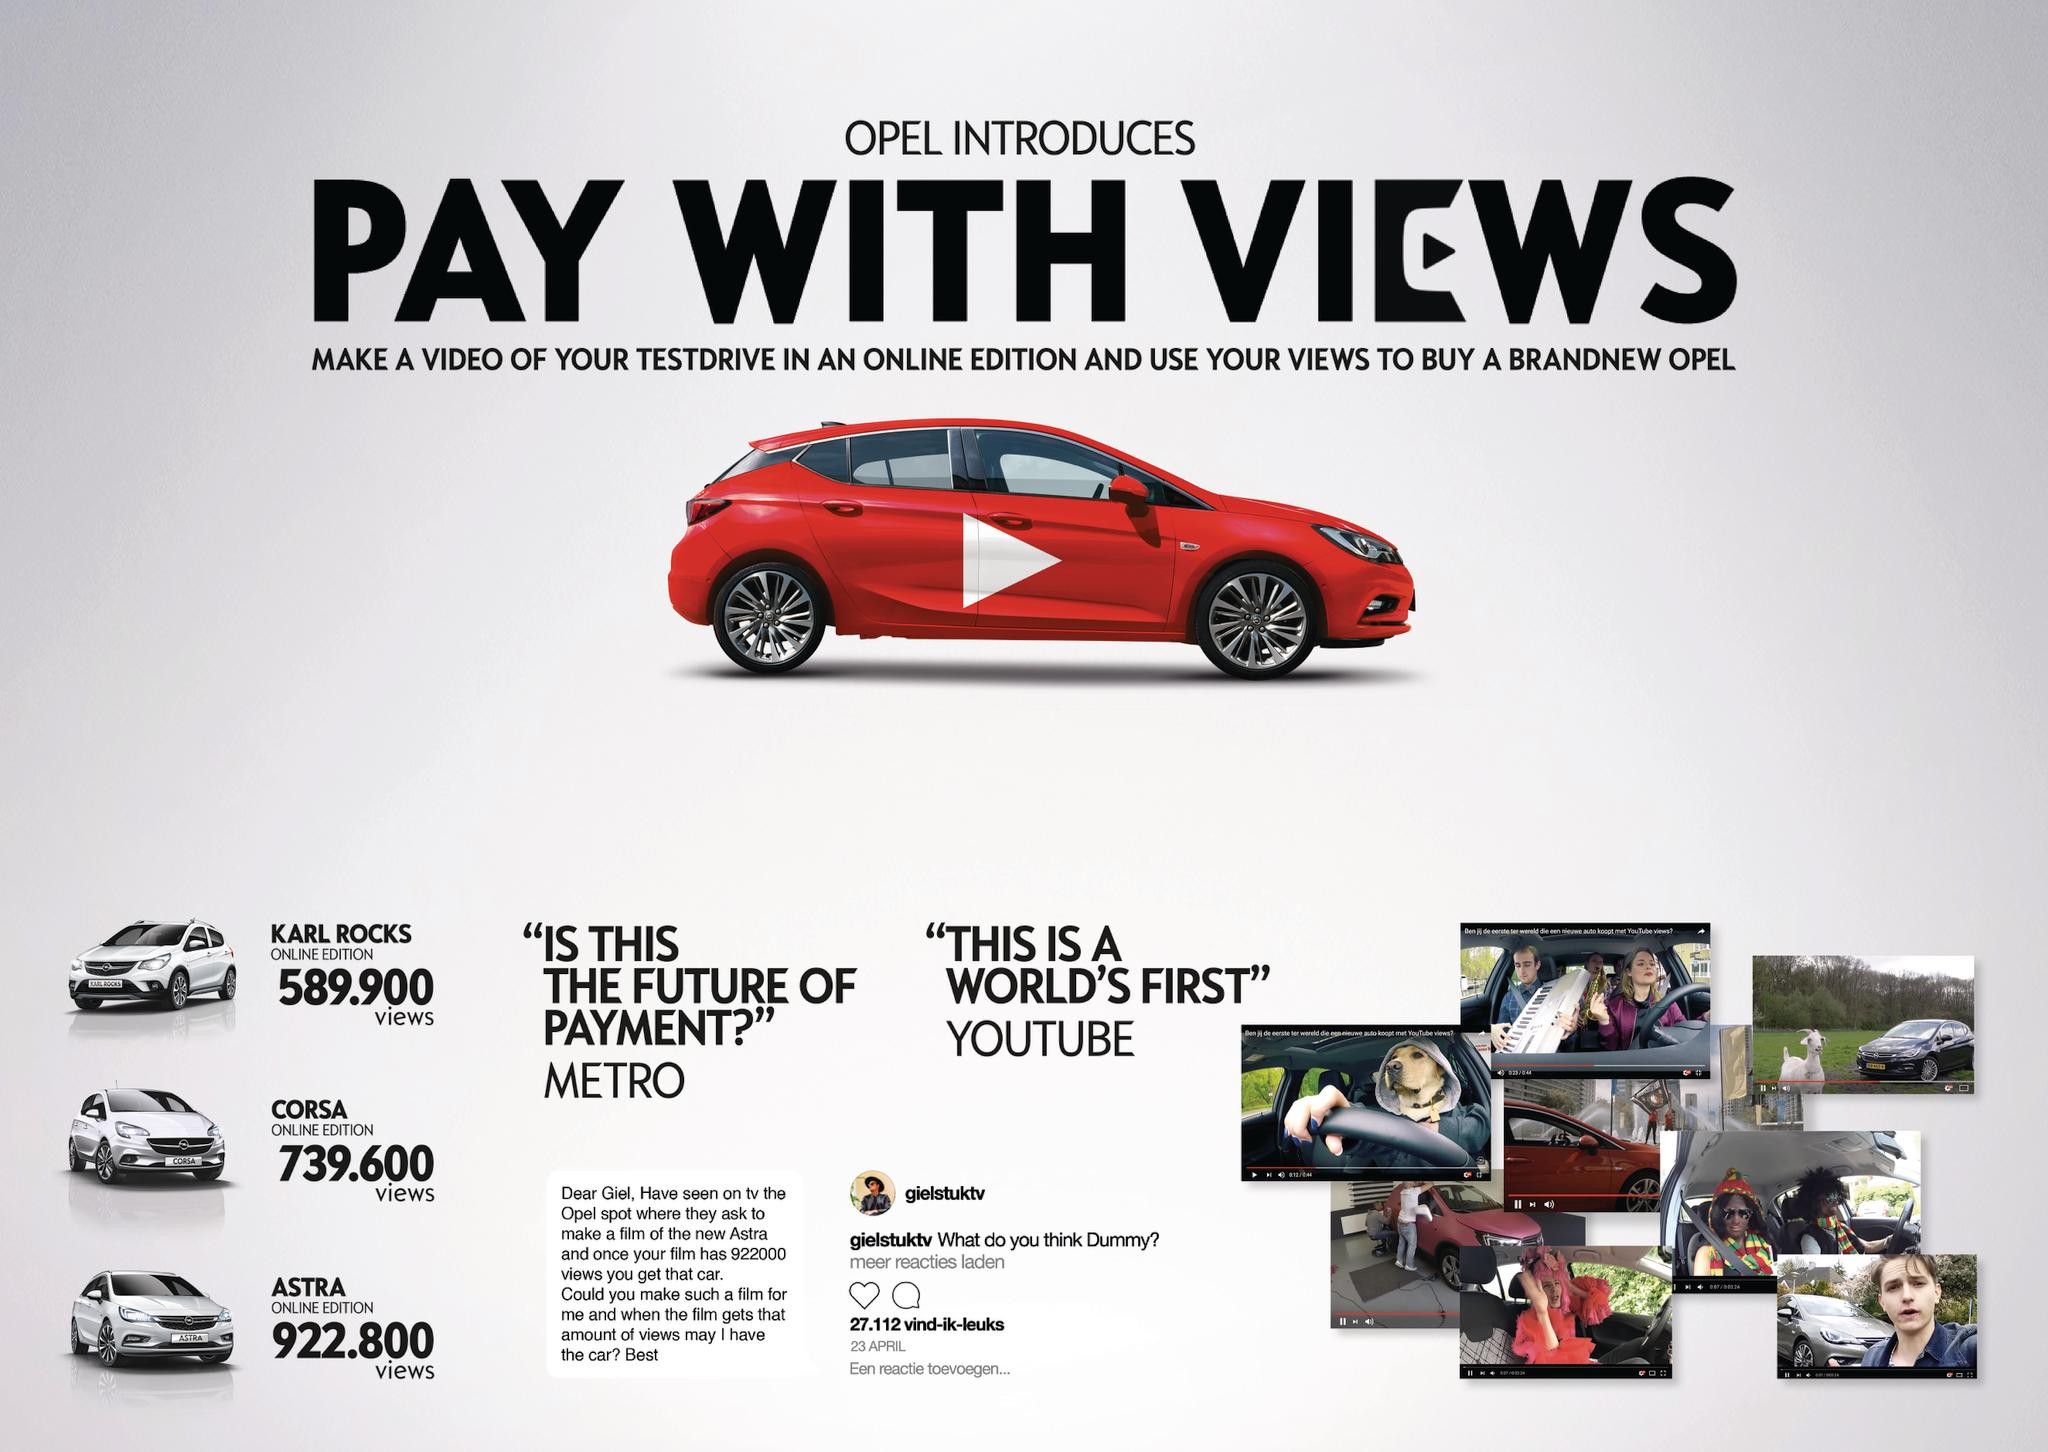 PAY WITH VIEWS